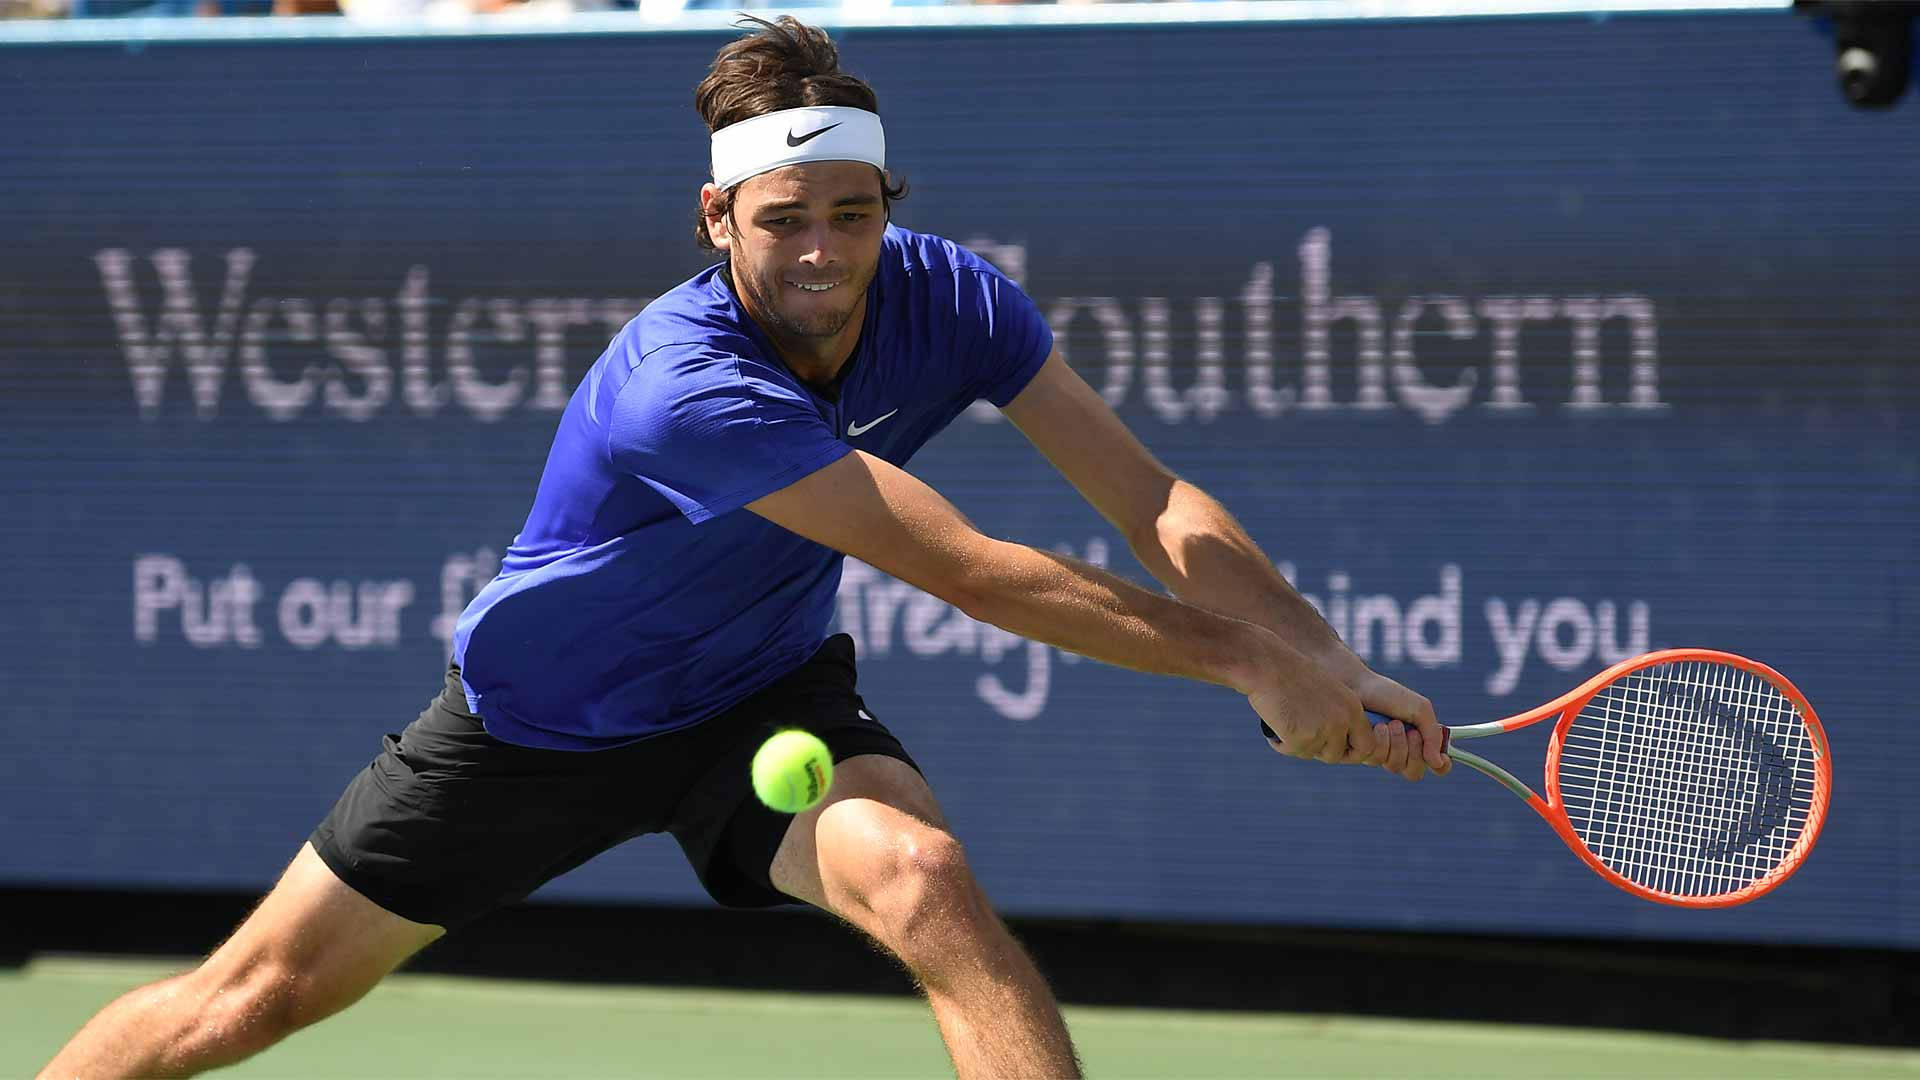 American Tennis Prodigy, Taylor Fritz In Action